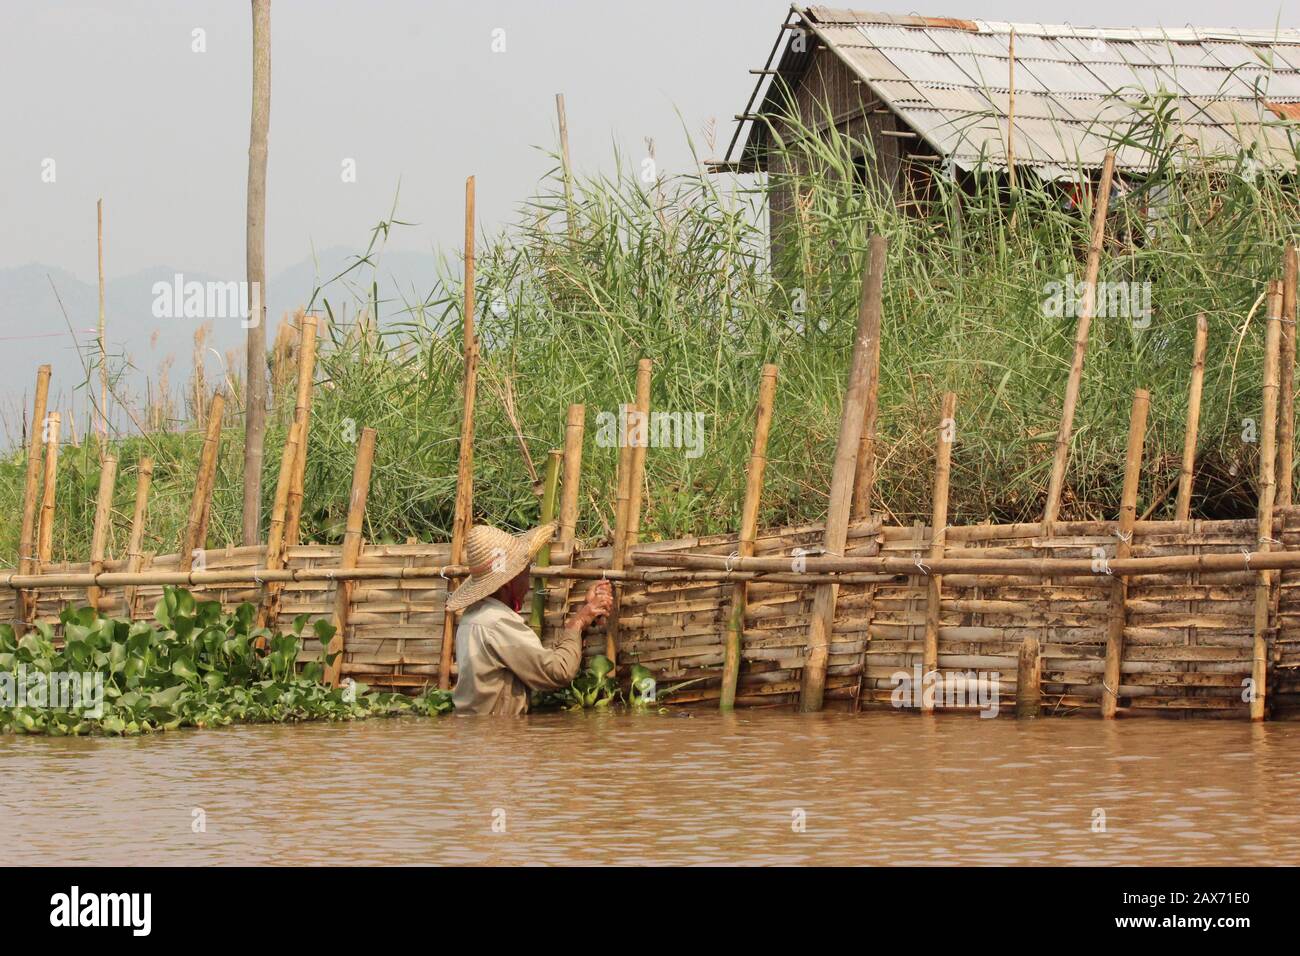 A man is fixing bamboo fence at Inle Lake Stock Photo